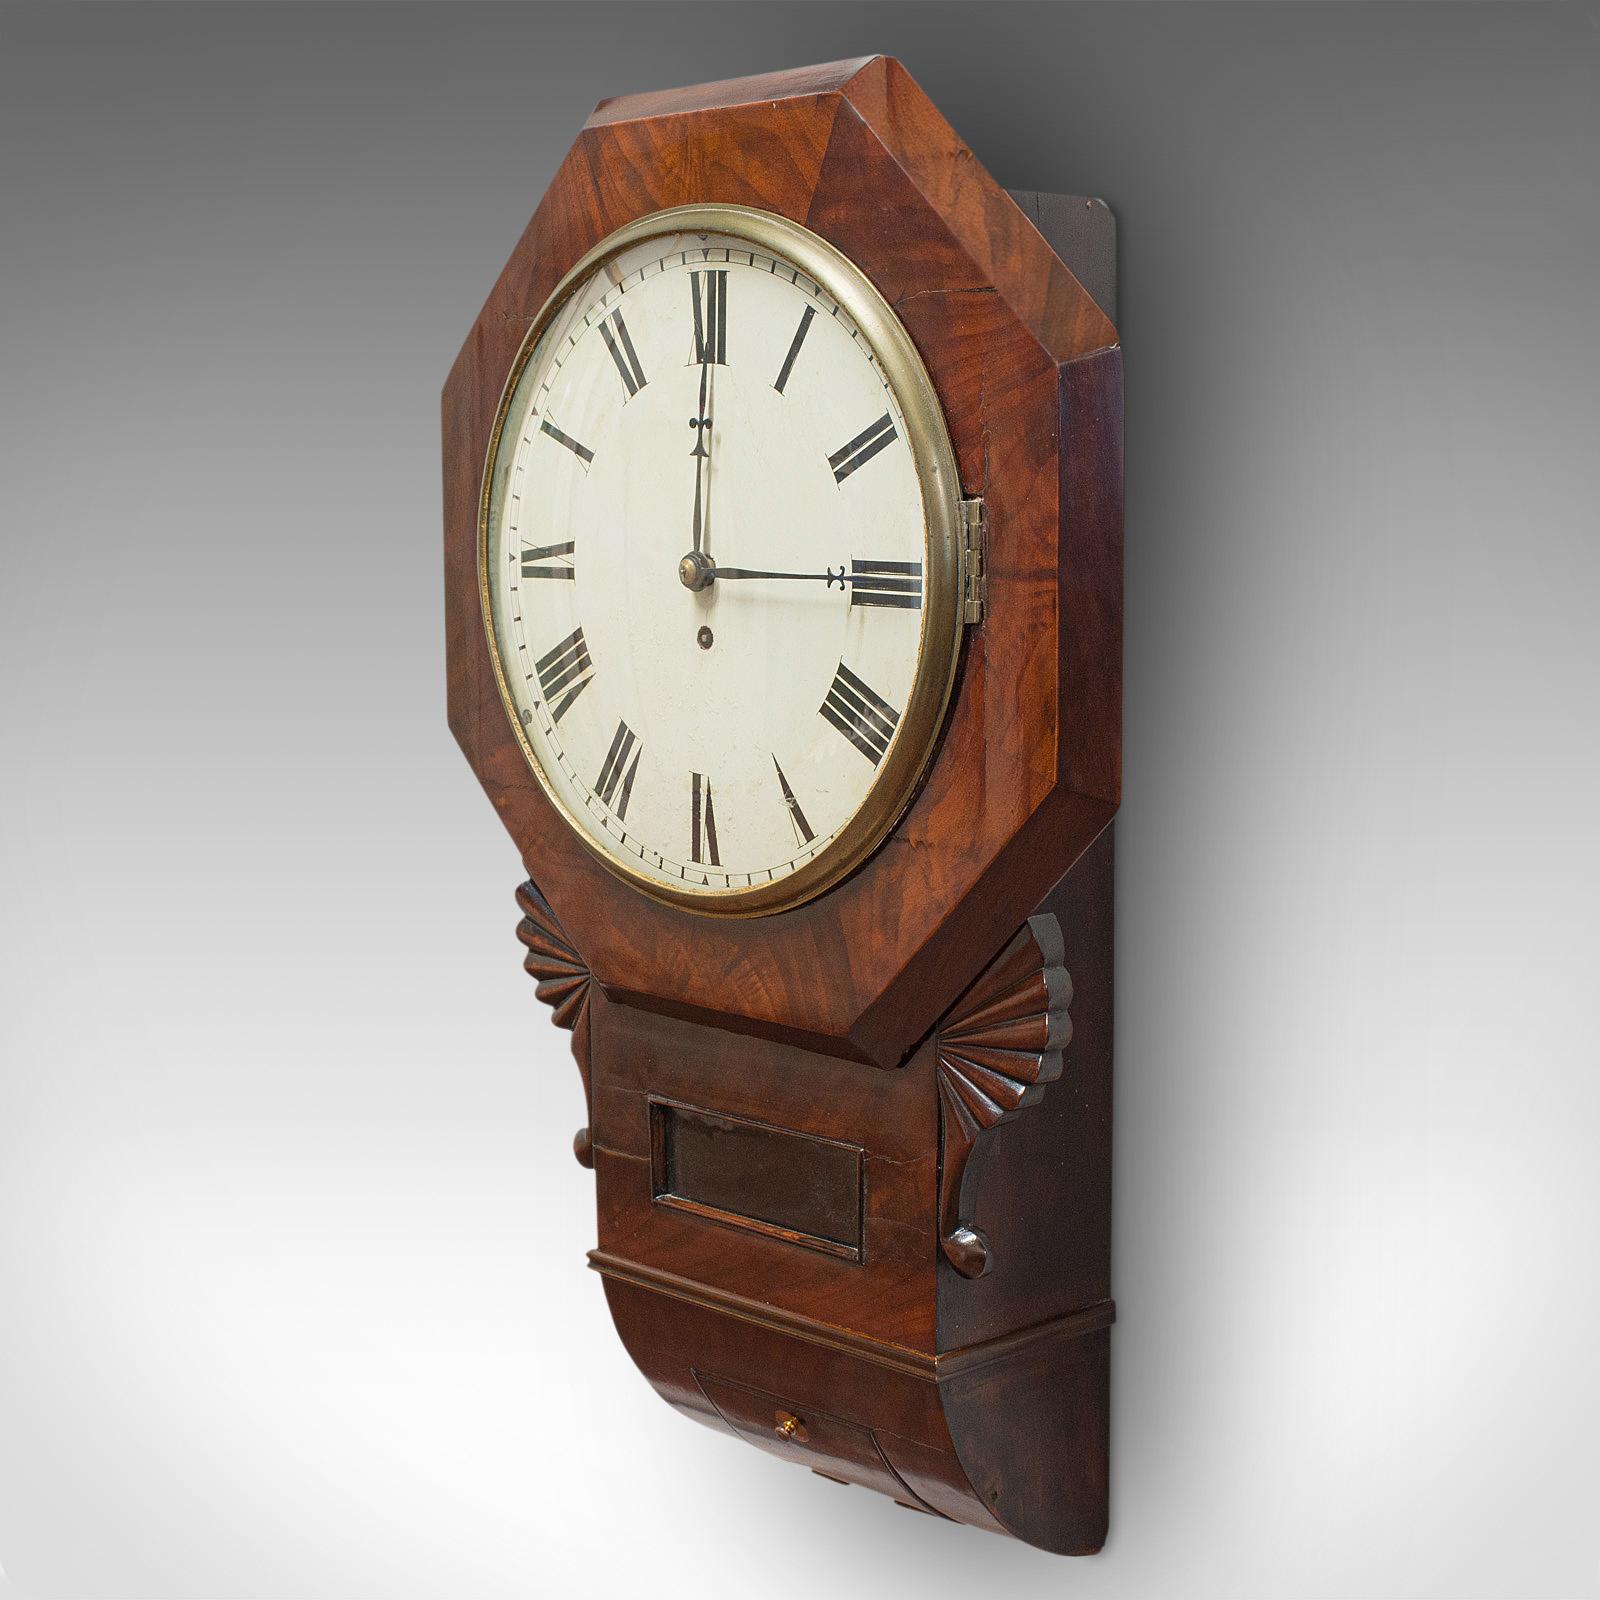 Our stock # 18.6442

This is an antique drop dial wall clock. An English, Victorian timepiece with fusee movement, dating to the Victorian period, circa 1870.

A delightful Victorian timepiece
Displays a desirable aged patina
Select walnut